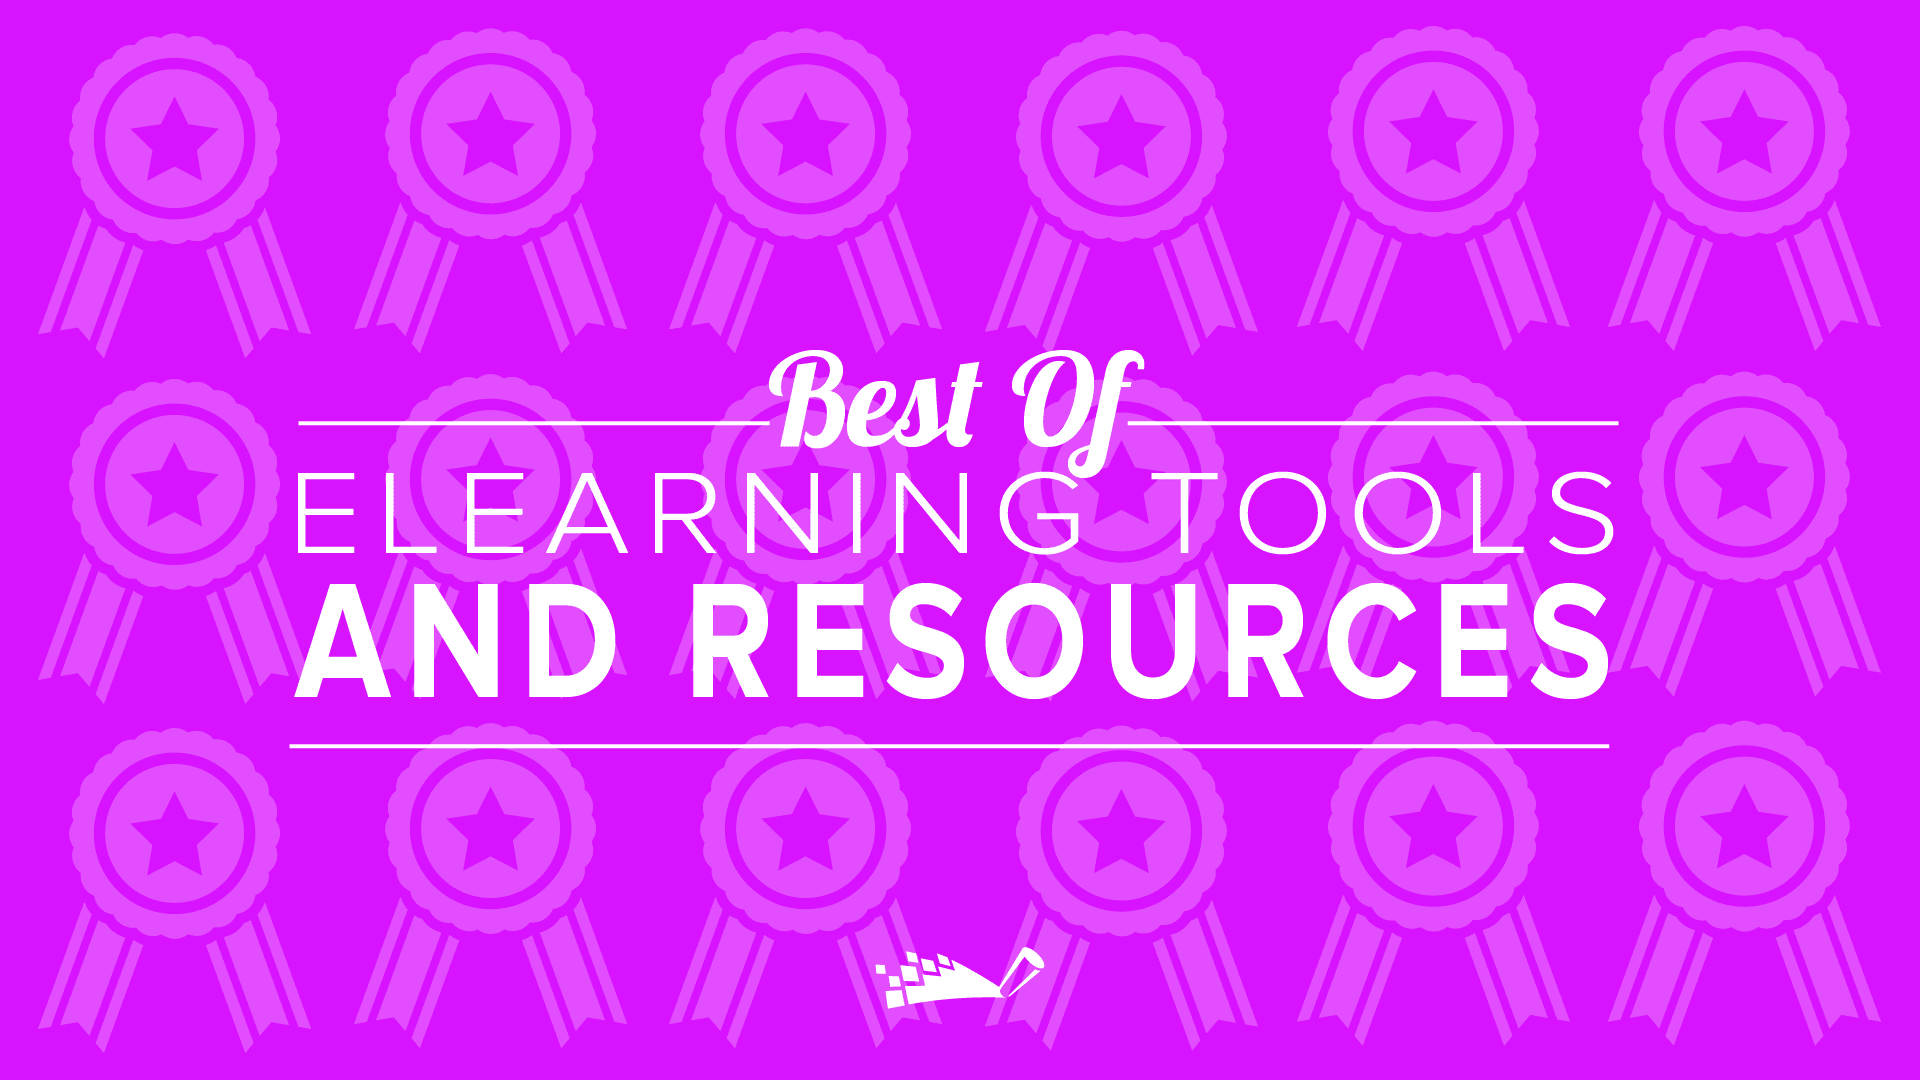 Best Of: 100+ eLearning Tools and Resources | DigitalChalk